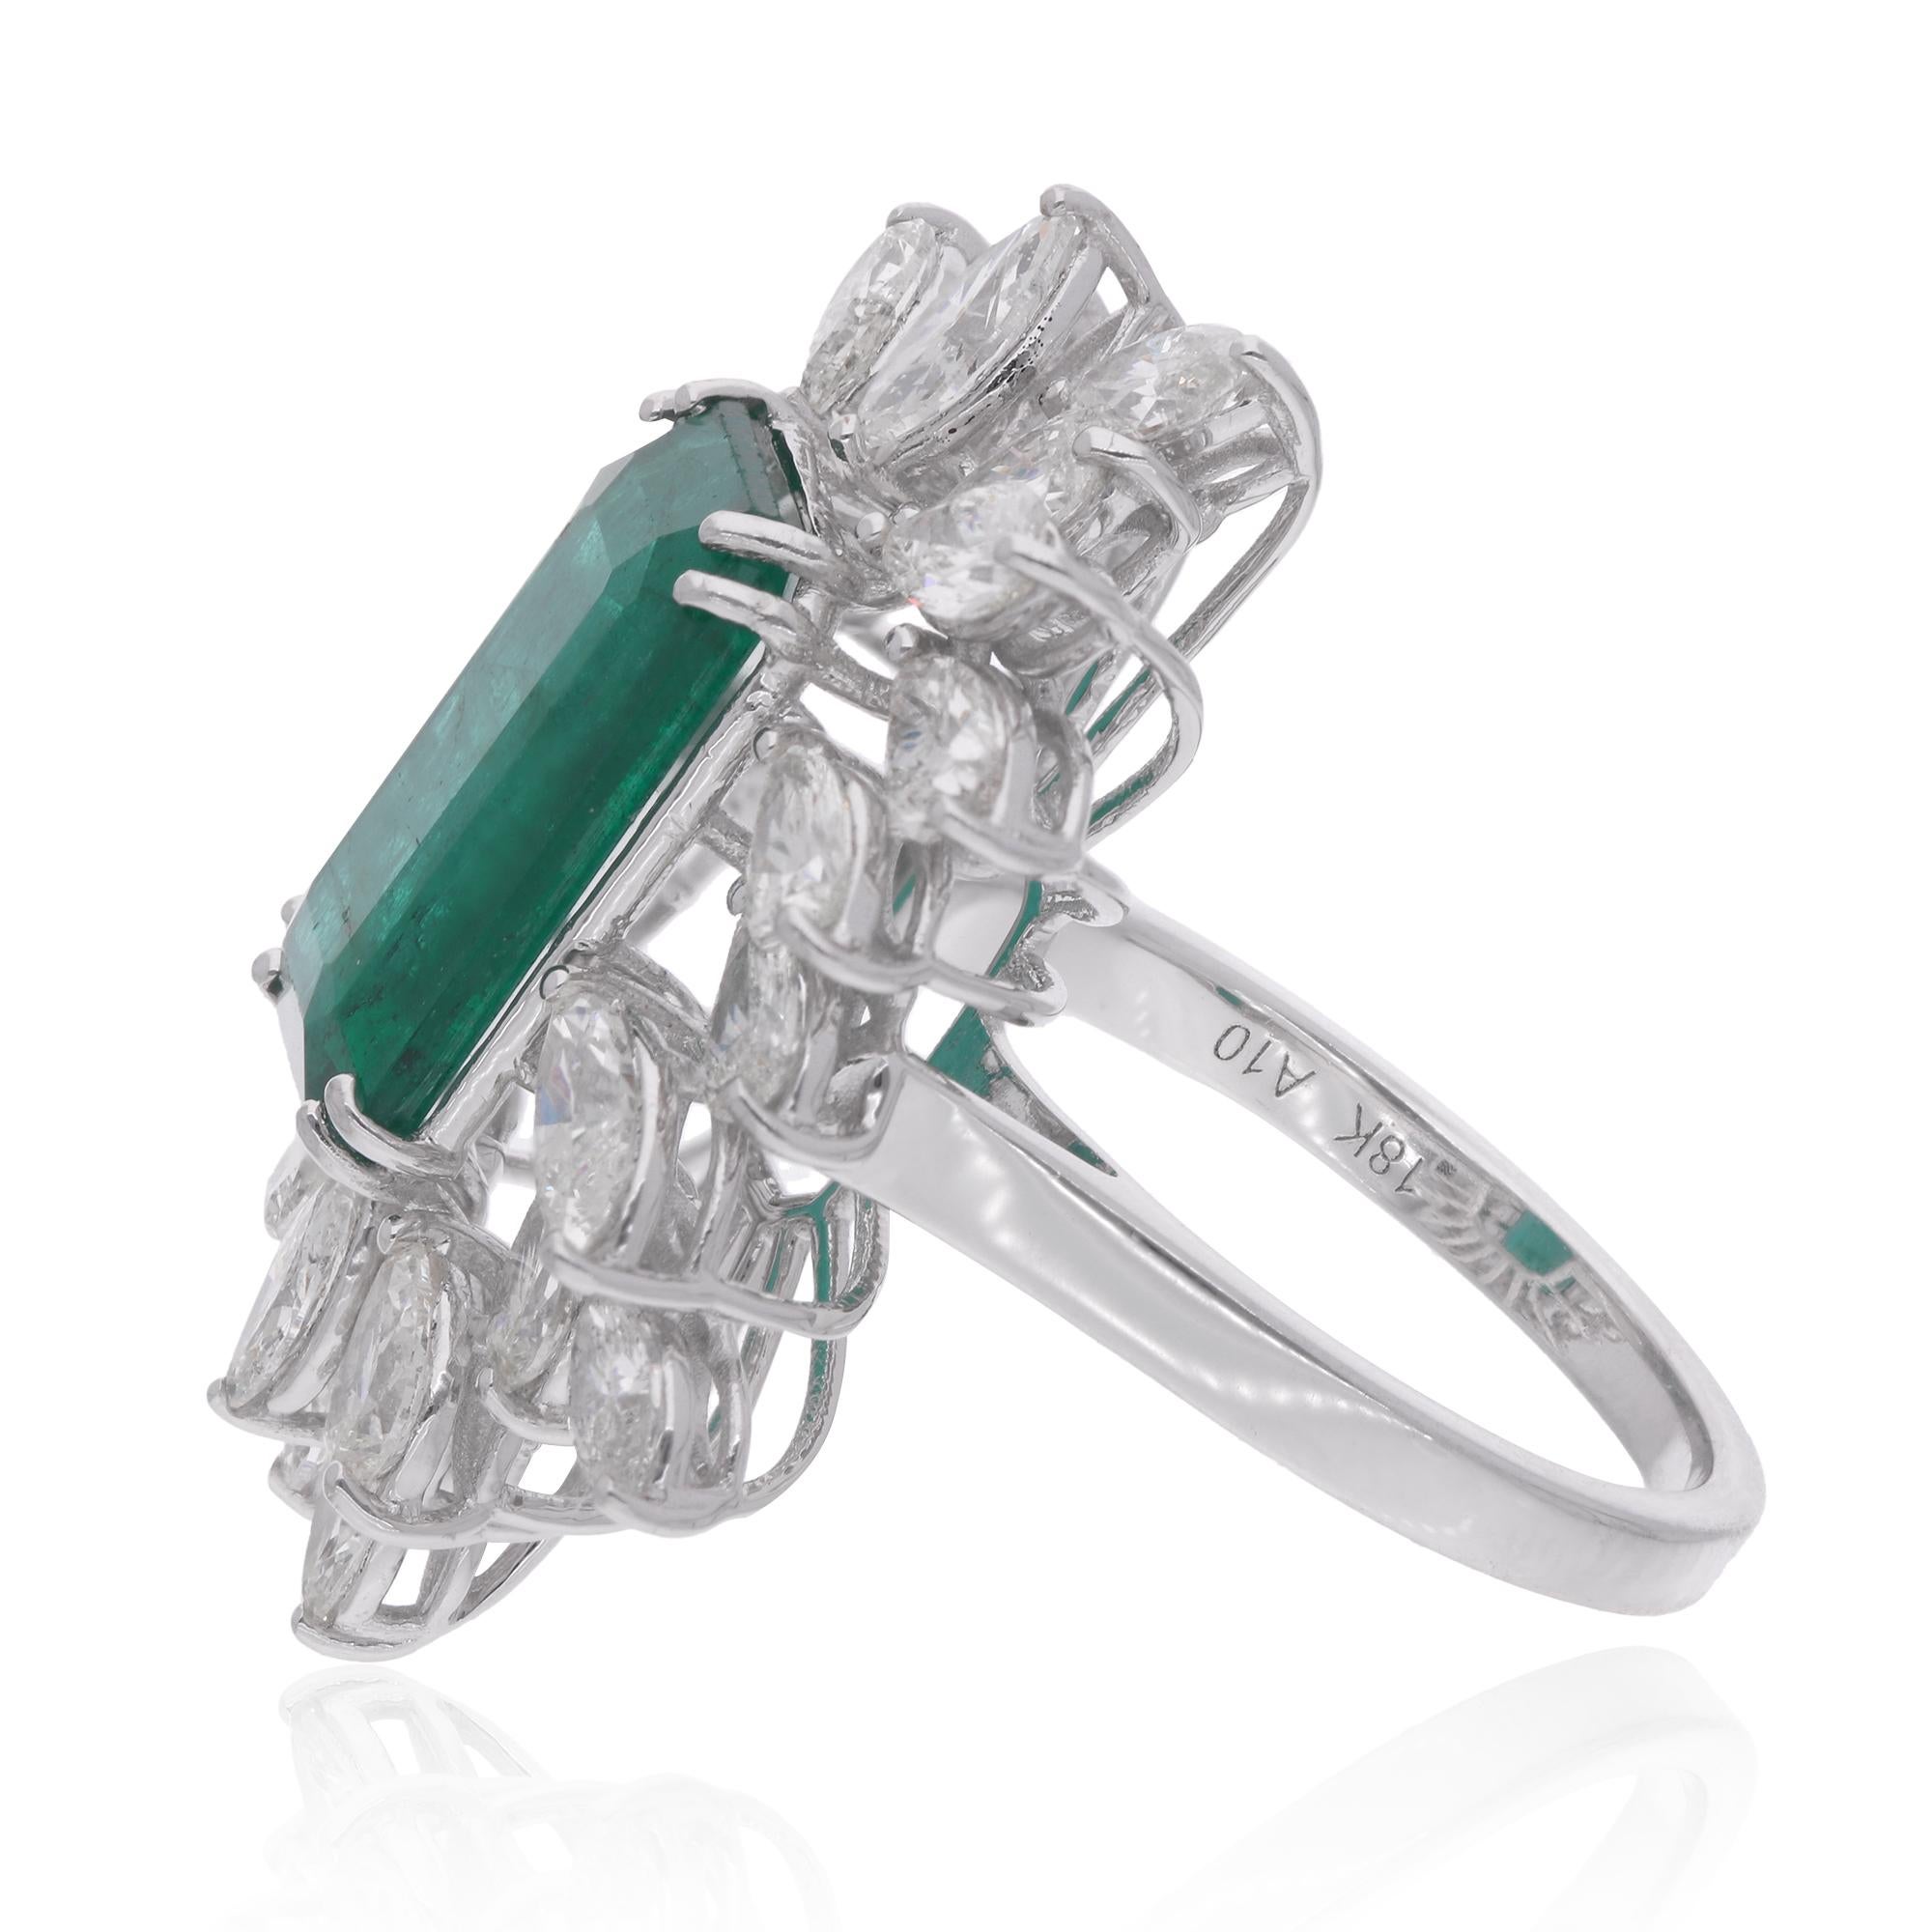 Surrounding the emerald centerpiece are shimmering Marquise Diamonds, meticulously set in a halo design. These Diamonds, selected for their exceptional sparkle and fire, add a touch of luxury and sophistication to the ring, enhancing the beauty of